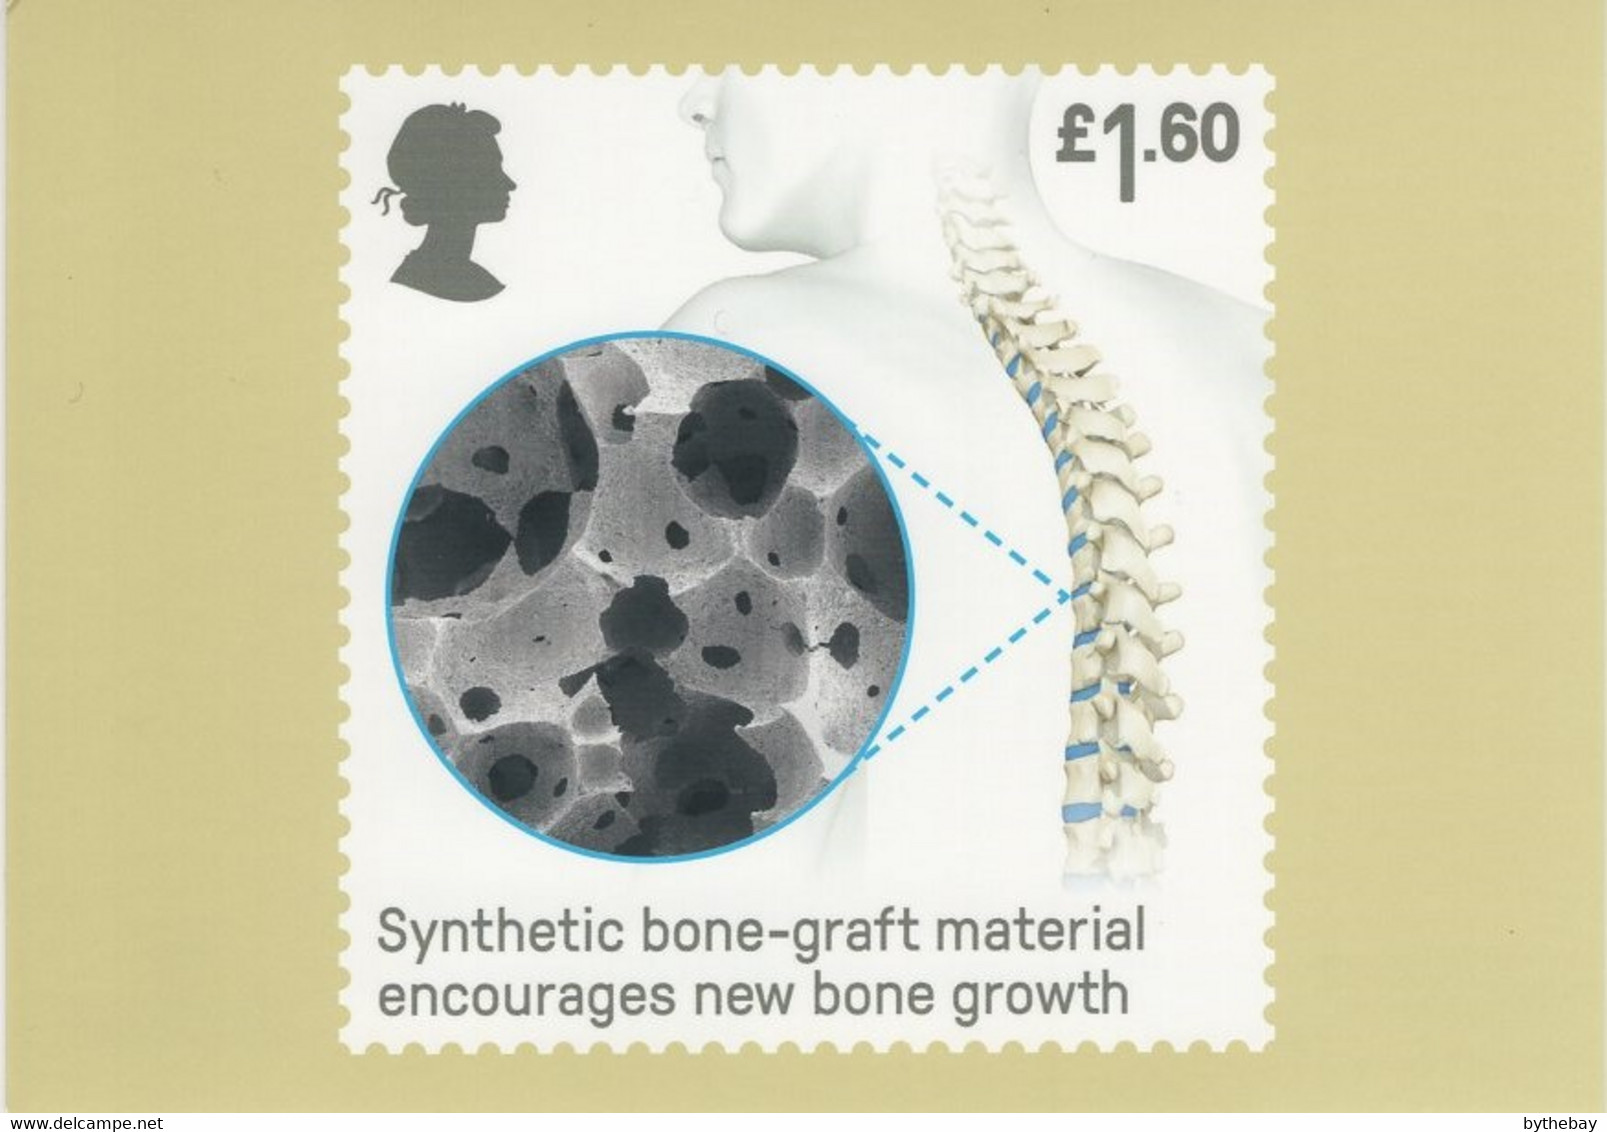 Great Britain 2019 PHQ Card Sc 3844 1.60pd Synthetic Bone-graft Material - PHQ Cards